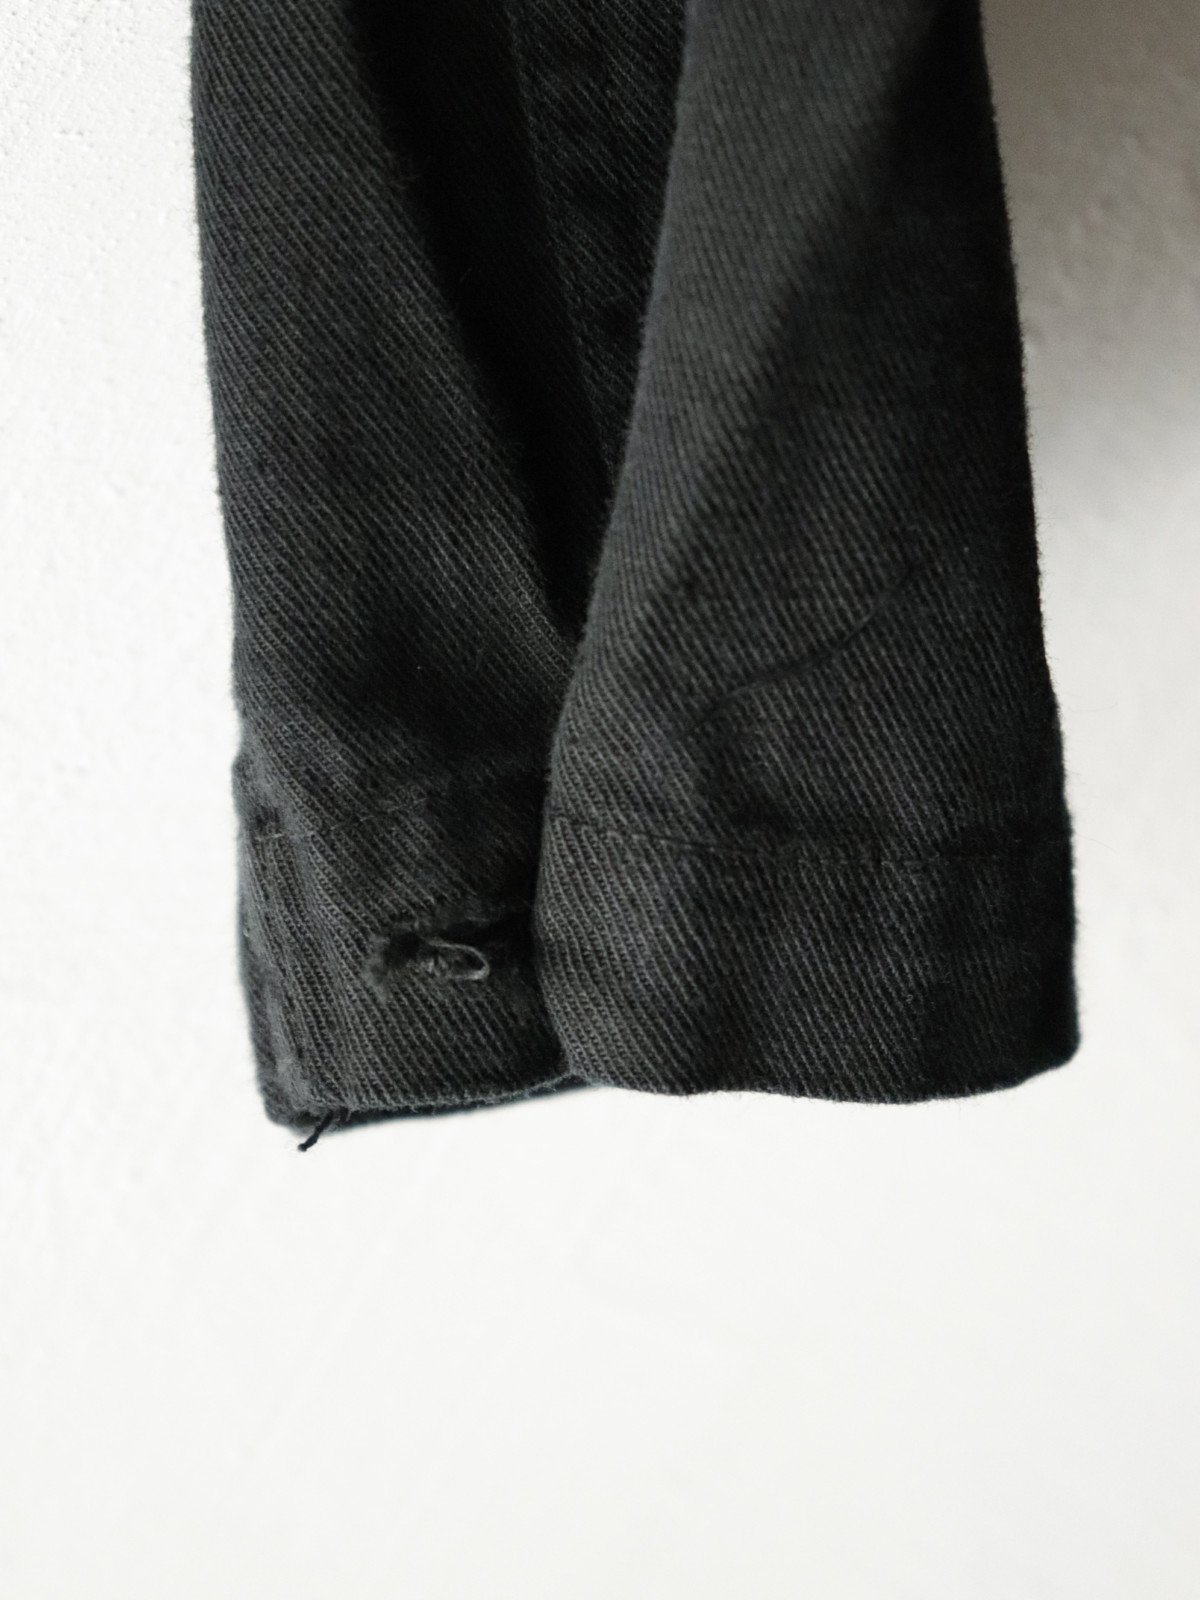 Vintage ,cotton, work, all in one ,Black-dyed